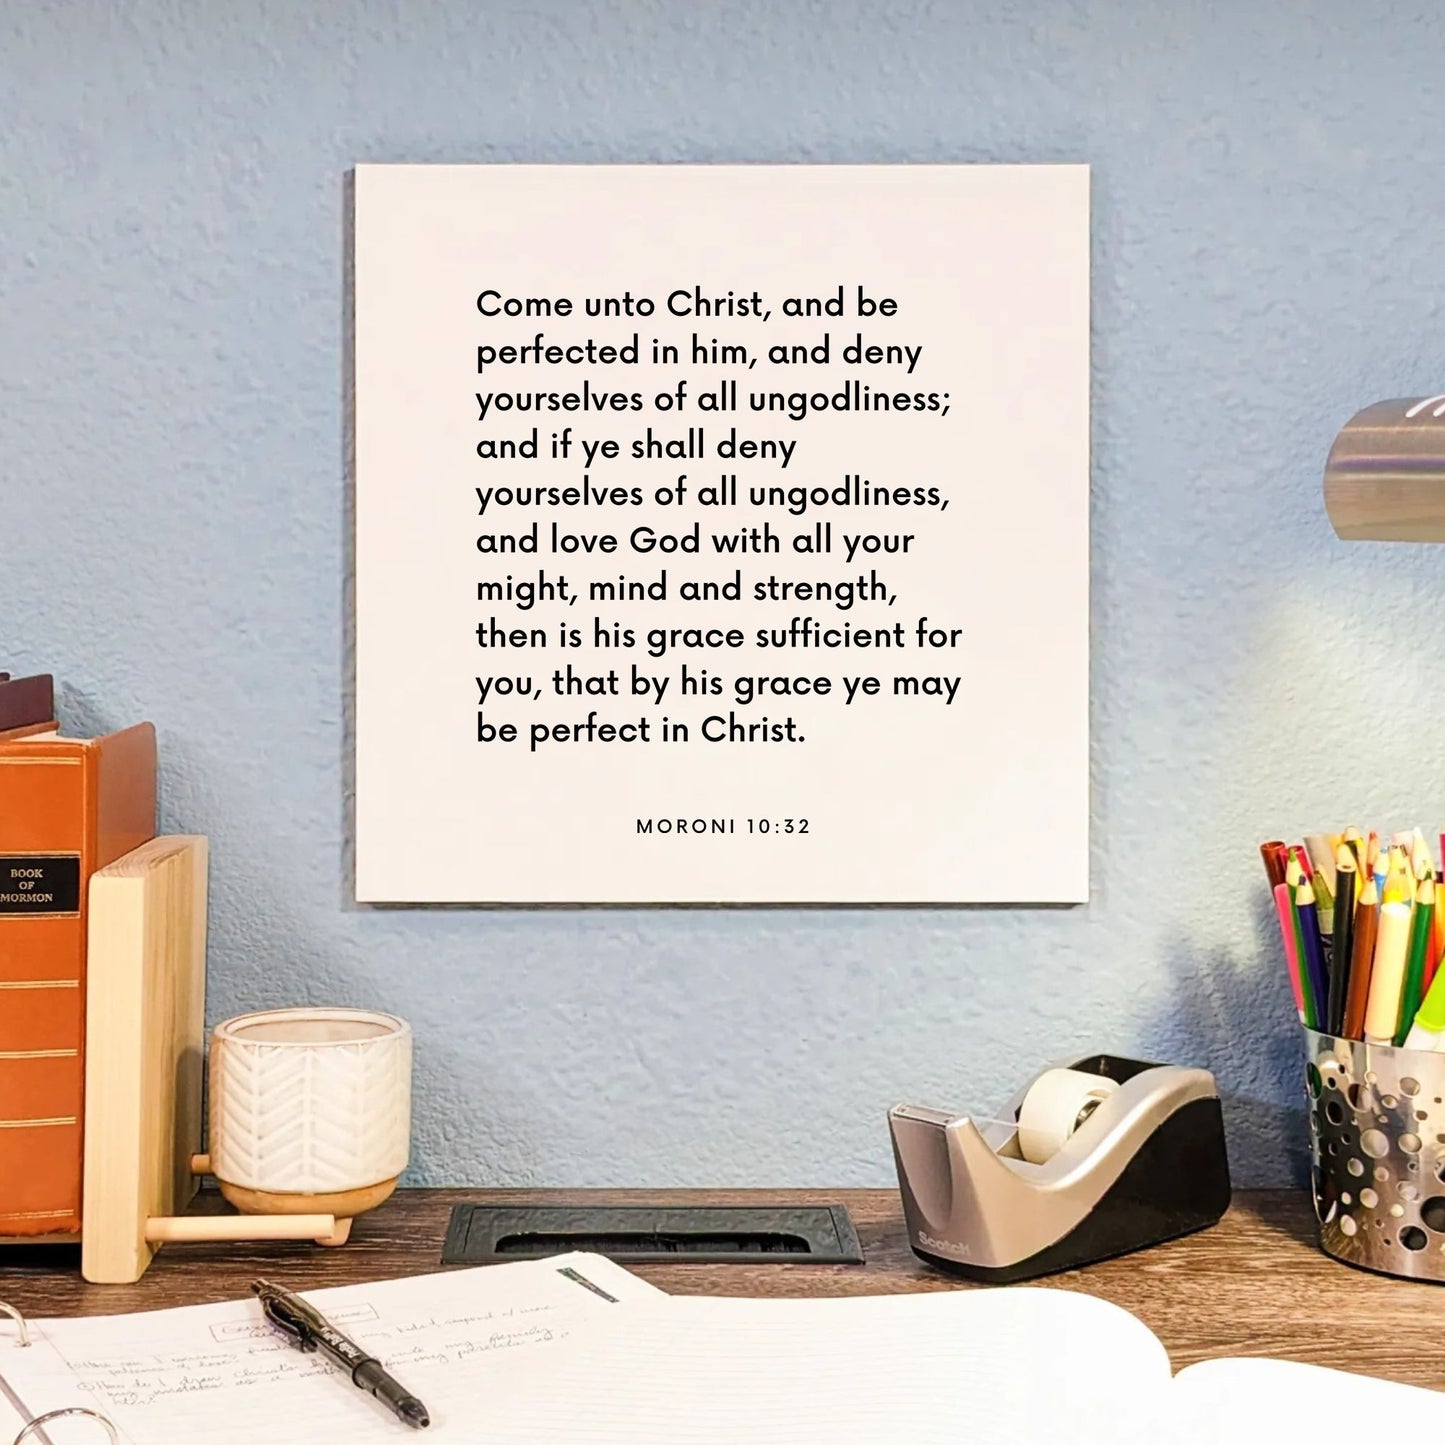 Desk mouting of the scripture tile for Moroni 10:32 - "Come unto Christ, and be perfected in him"